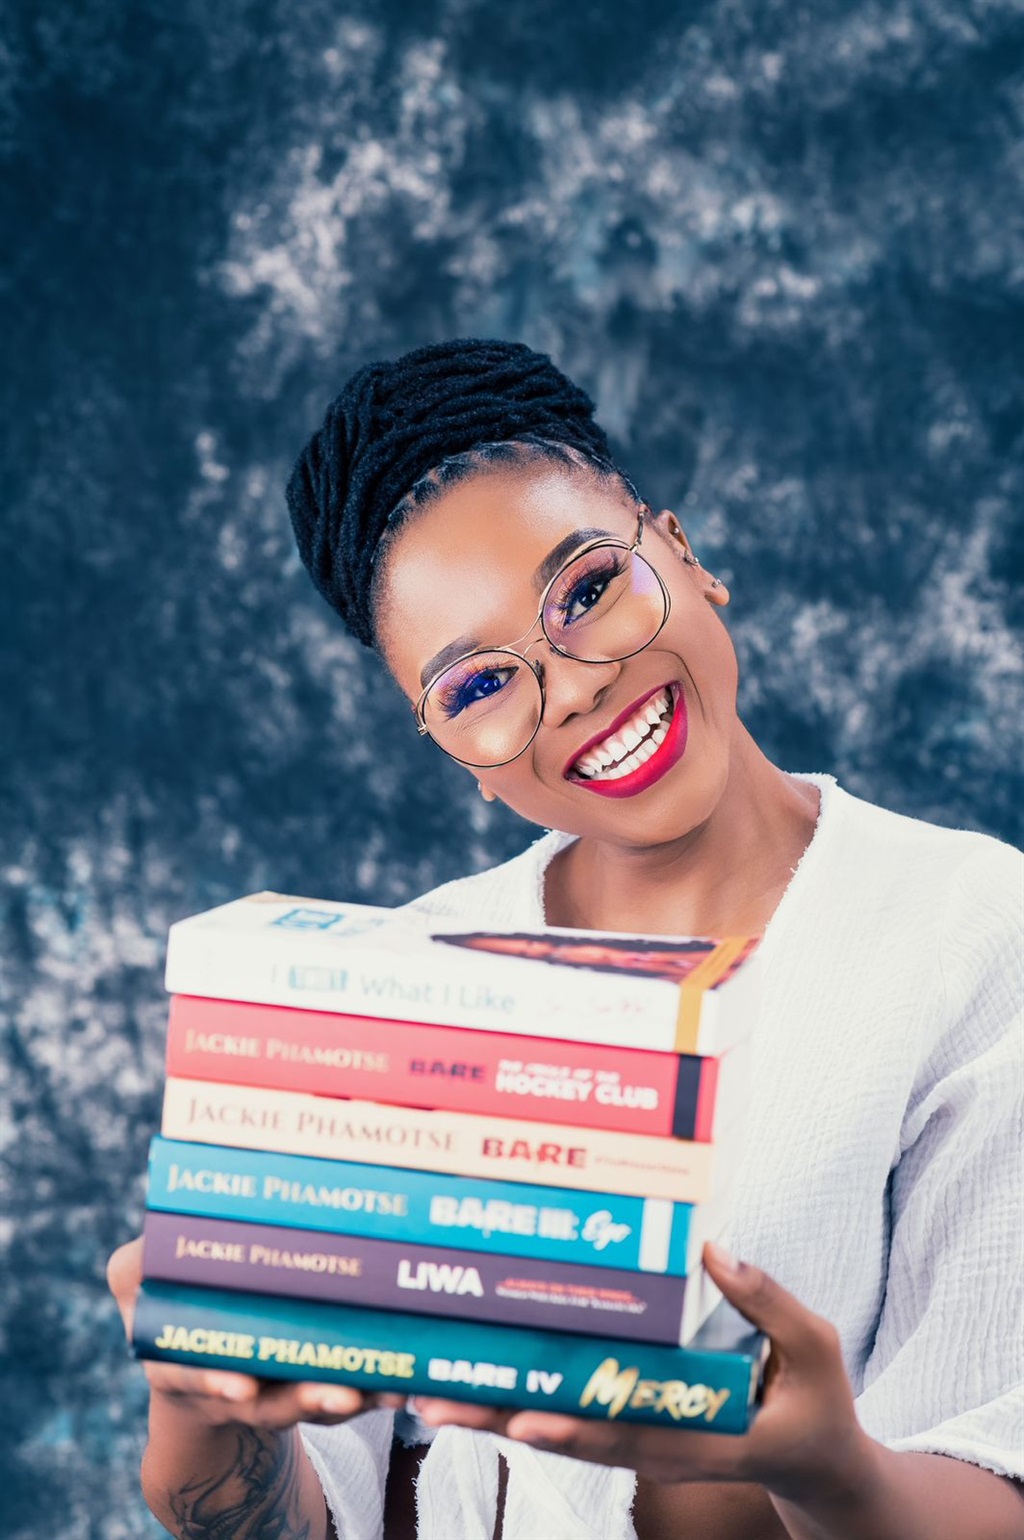 Jackie Phamotse said her books will be turned into a TV show.